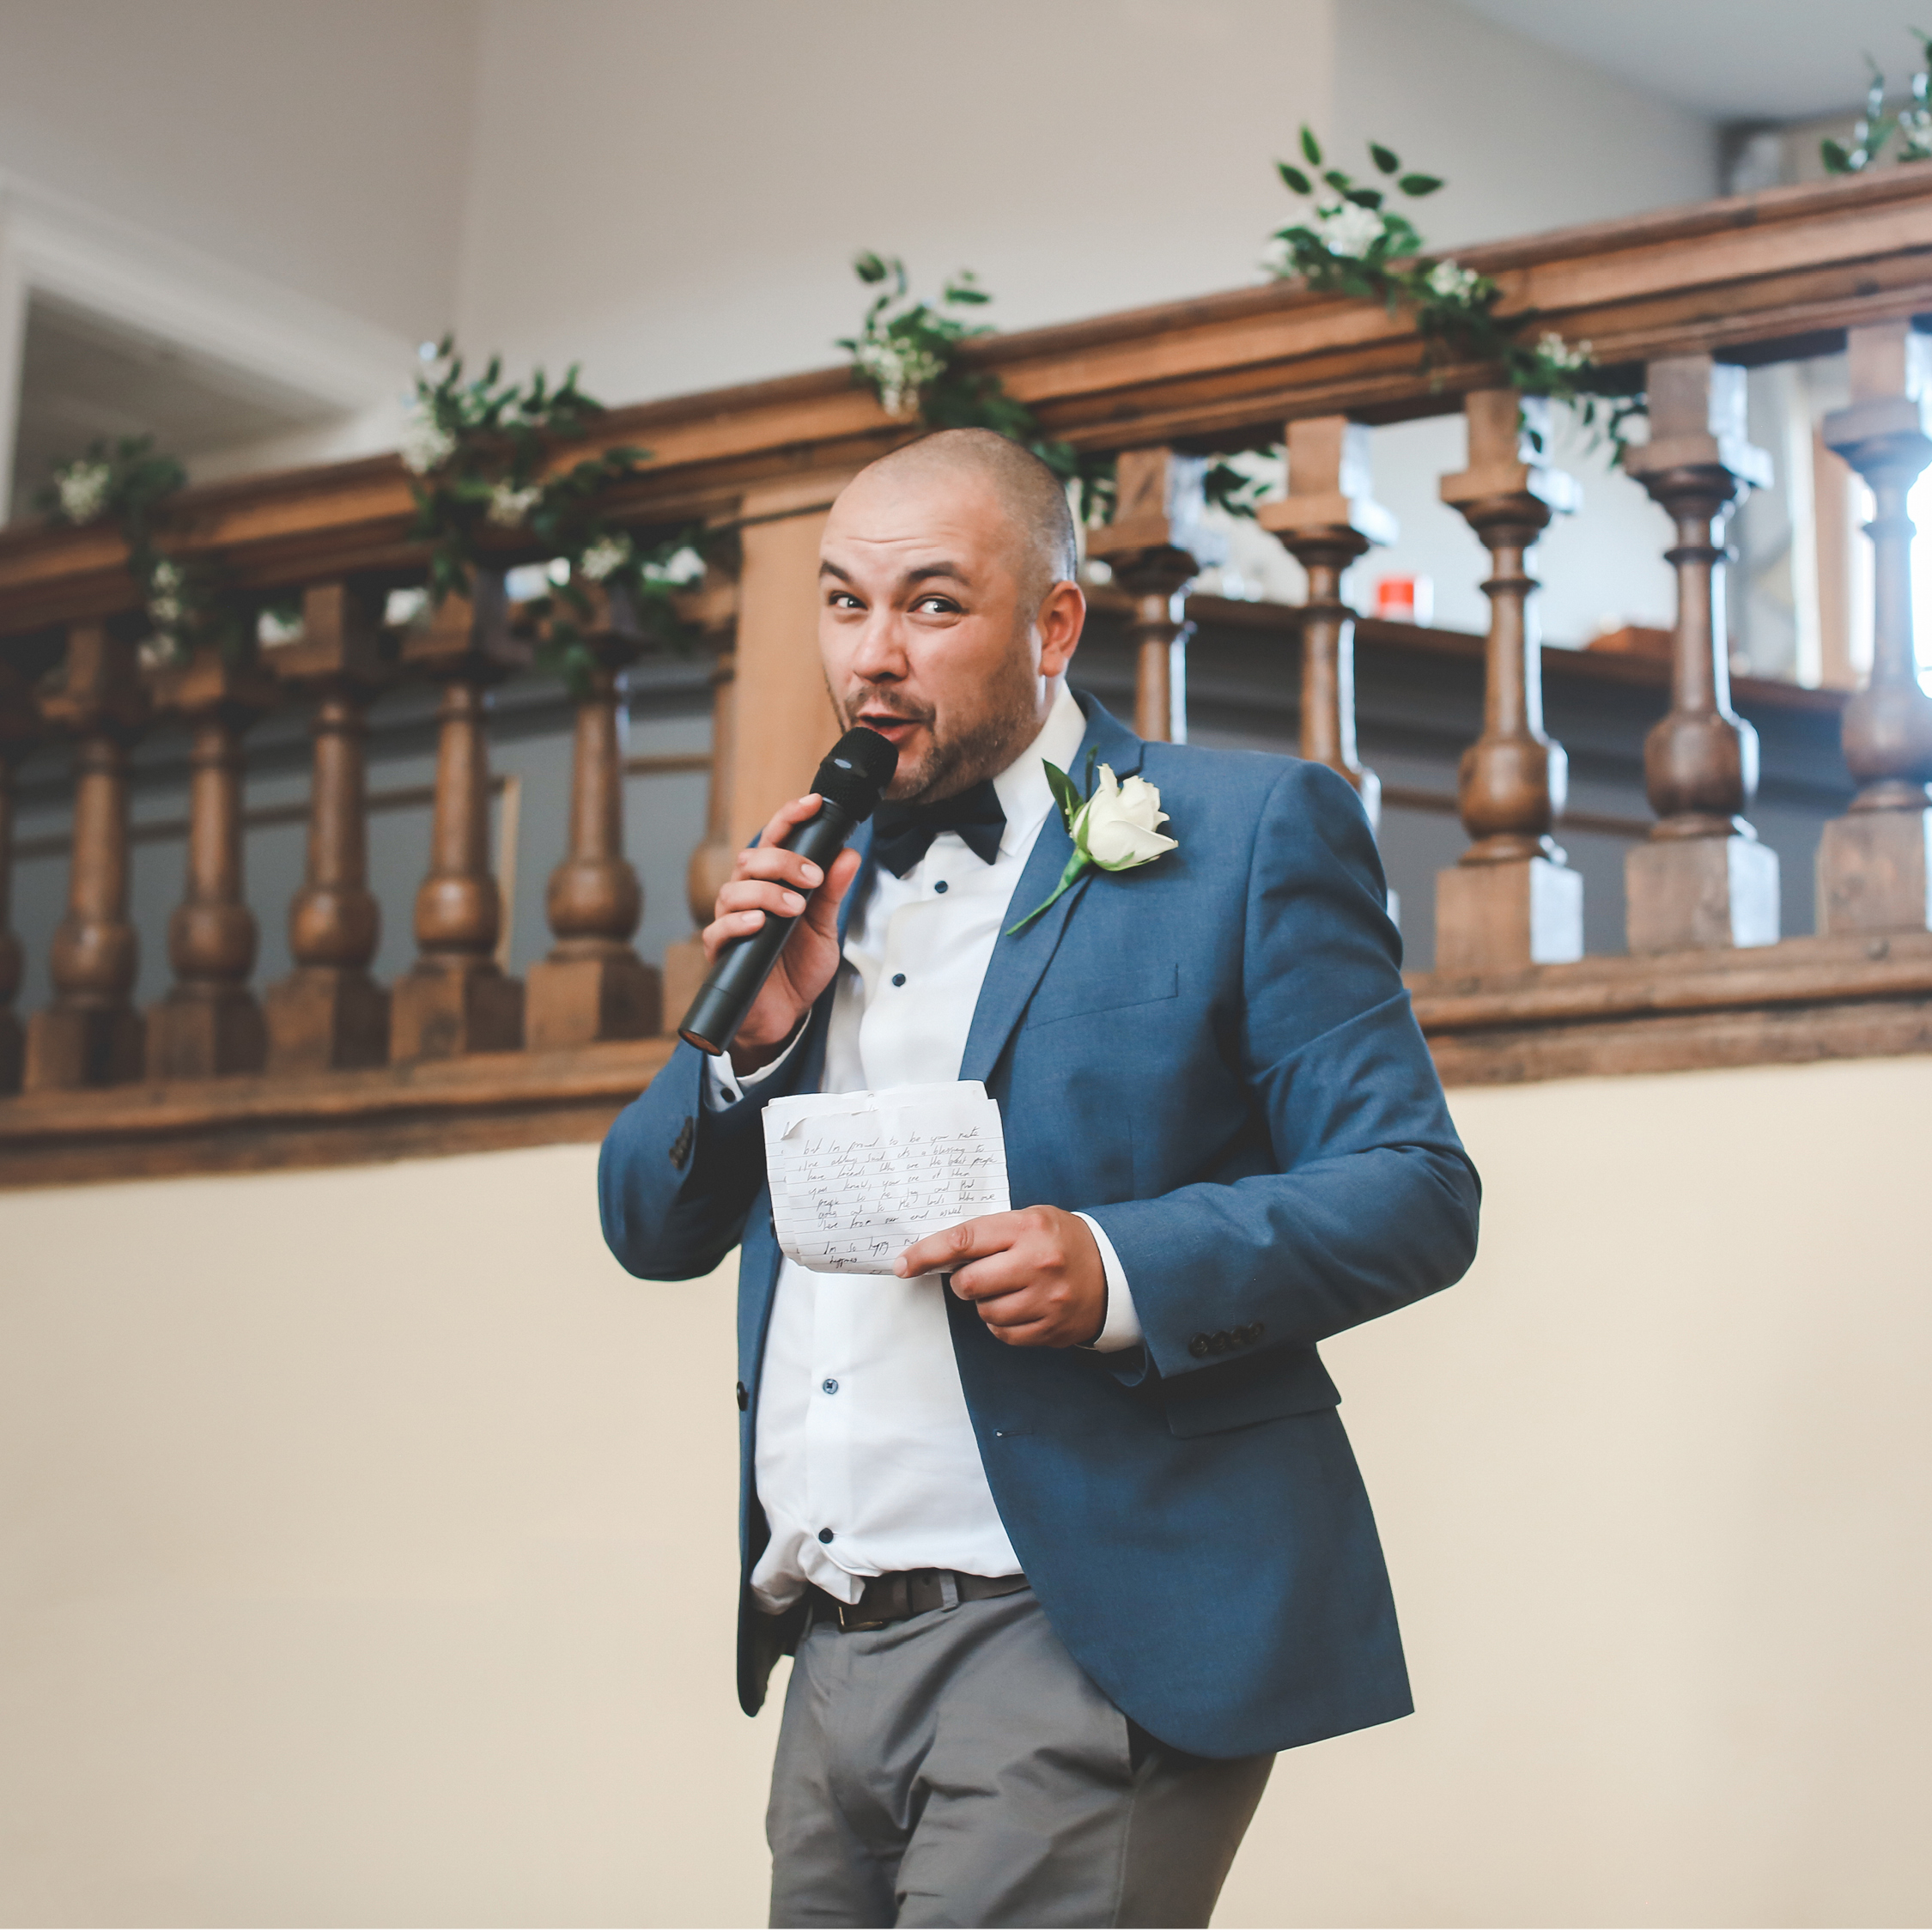 Things You'll Remember Your Big Day By in Years to Come, wedding speech